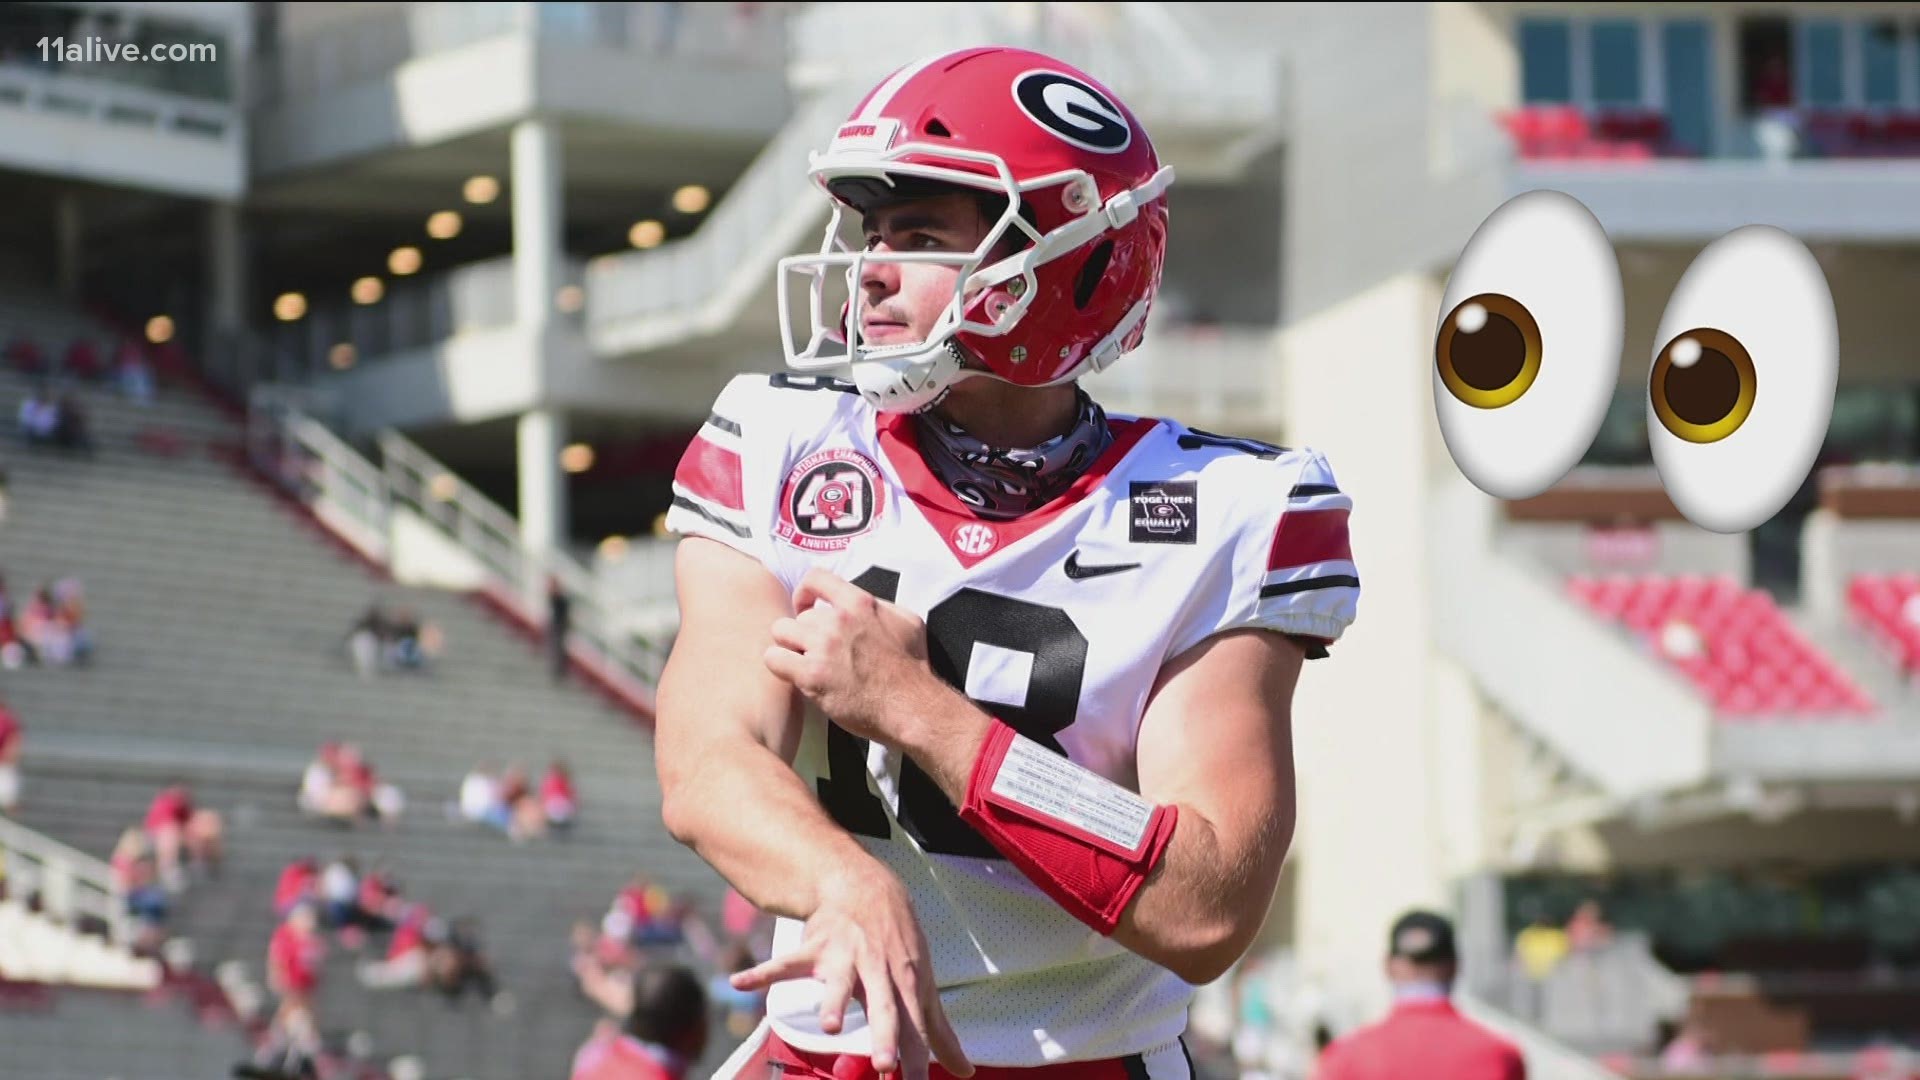 Georgia fans want to know why he's stil on the bench and want to see him play. Our UGA Insider Radi Nabulsi explains.